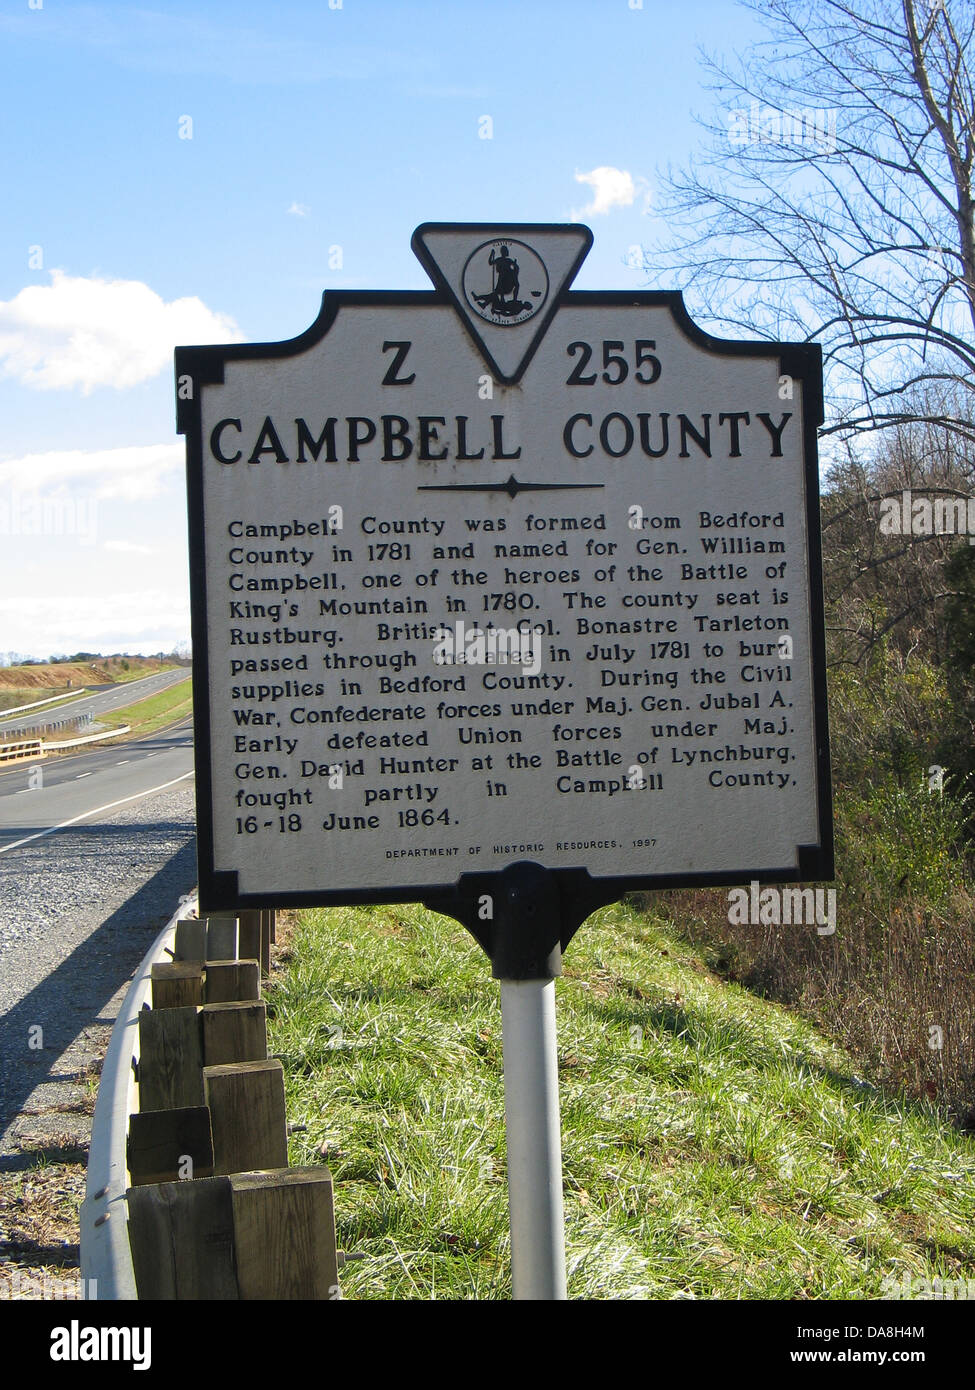 CAMPBELL COUNTY Campbell County was created from Bedford County by the Virginia General Assembly in 1781 and named for Gen. William Campbell, one of the heroes of the Battle of King's Mountain in 1780. The county seat is Rustburg. British Lt. Col. Banastre Tarleton's troops passed through the area in July 1781 to burn supplies in Bedford County. During the Civil War, Confederate forces under Maj. Gen. Jubal A. Early defeated Union forces under Maj. Gen. David Hunter at the Battle of Lynchburg, fought partly in Campbell County, 16-18 June 1864. Stock Photo